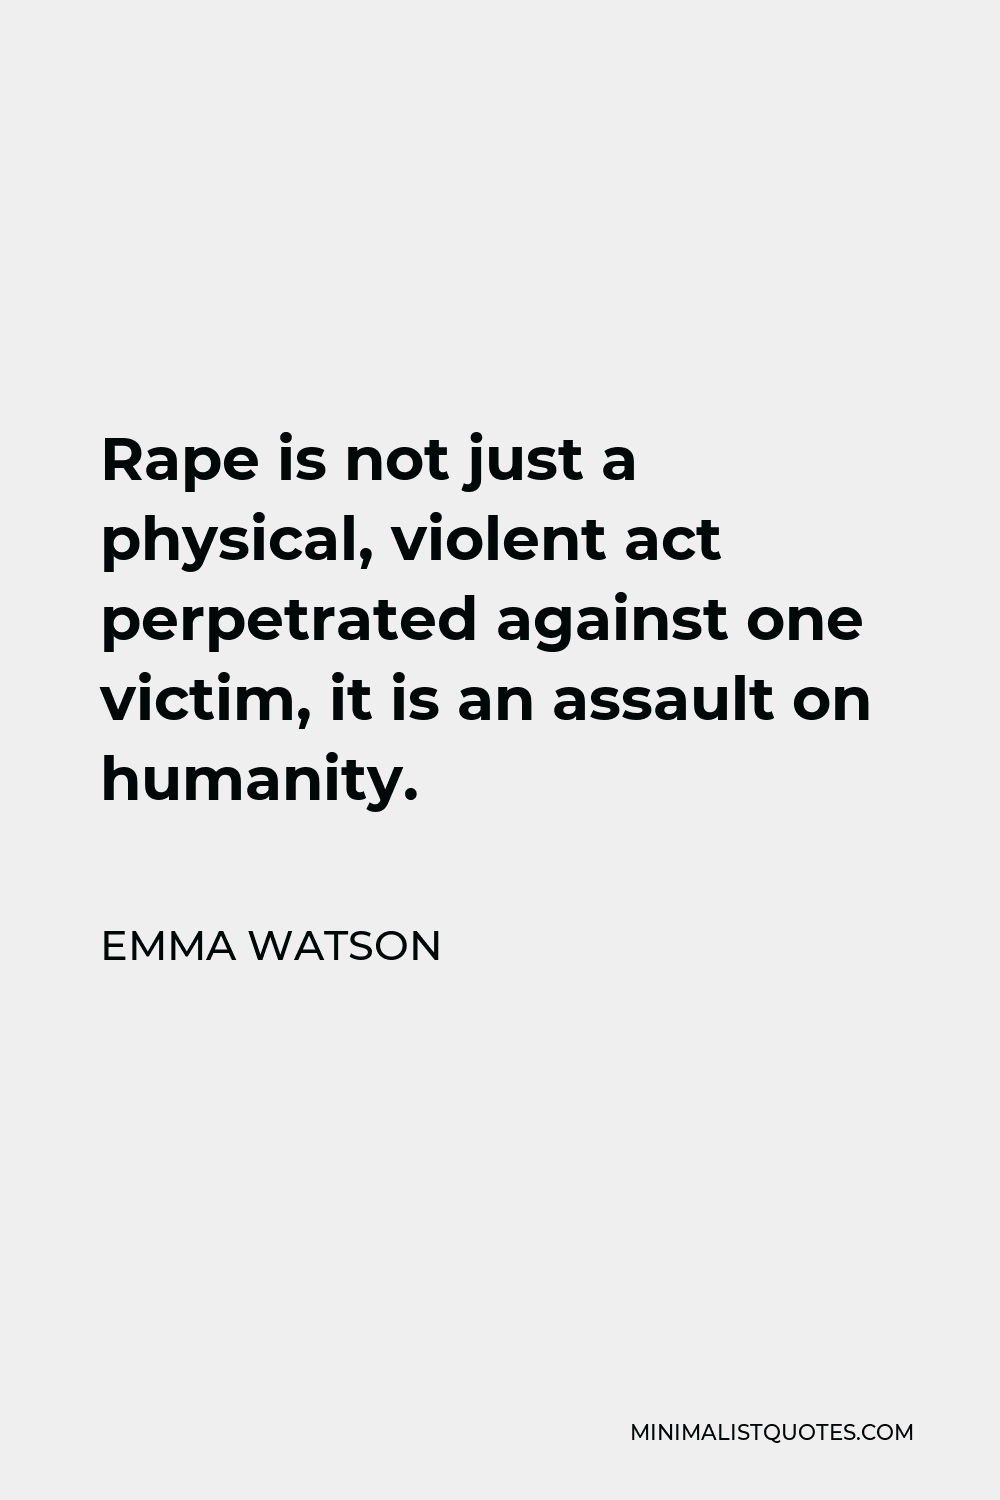 Emma Watson Quote - Rape is not just a physical, violent act perpetrated against one victim, it is an assault on humanity.